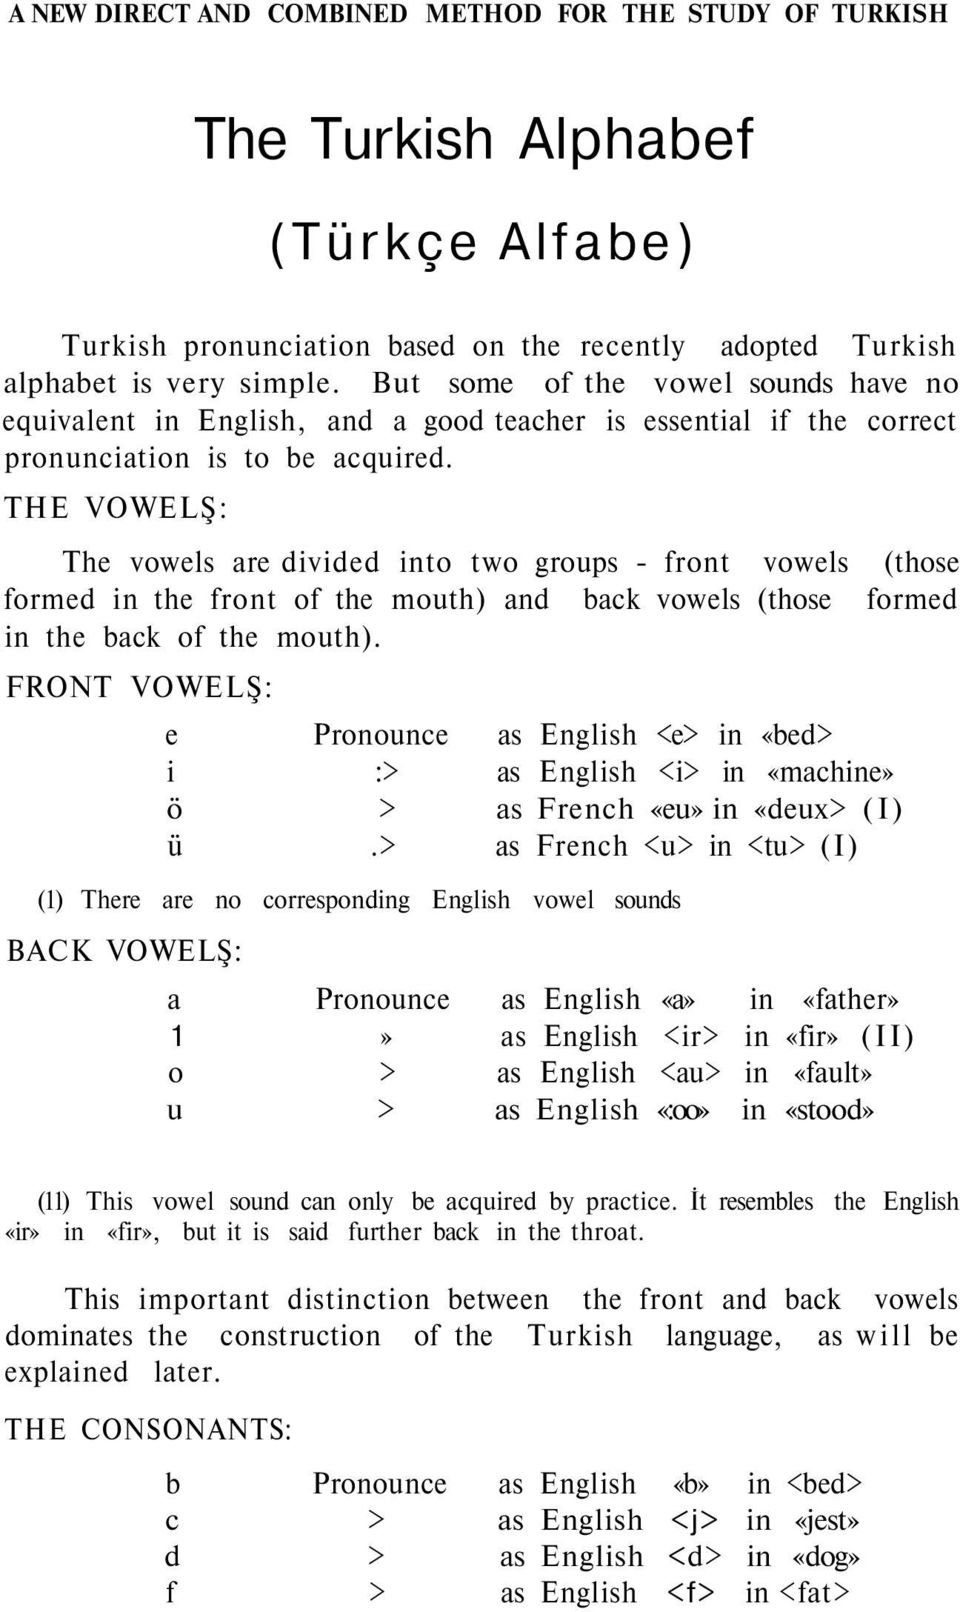 THE VOWELŞ: The vowels are divided into two groups - front vowels (those formed in the front of the mouth) and back vowels (those formed in the back of the mouth).